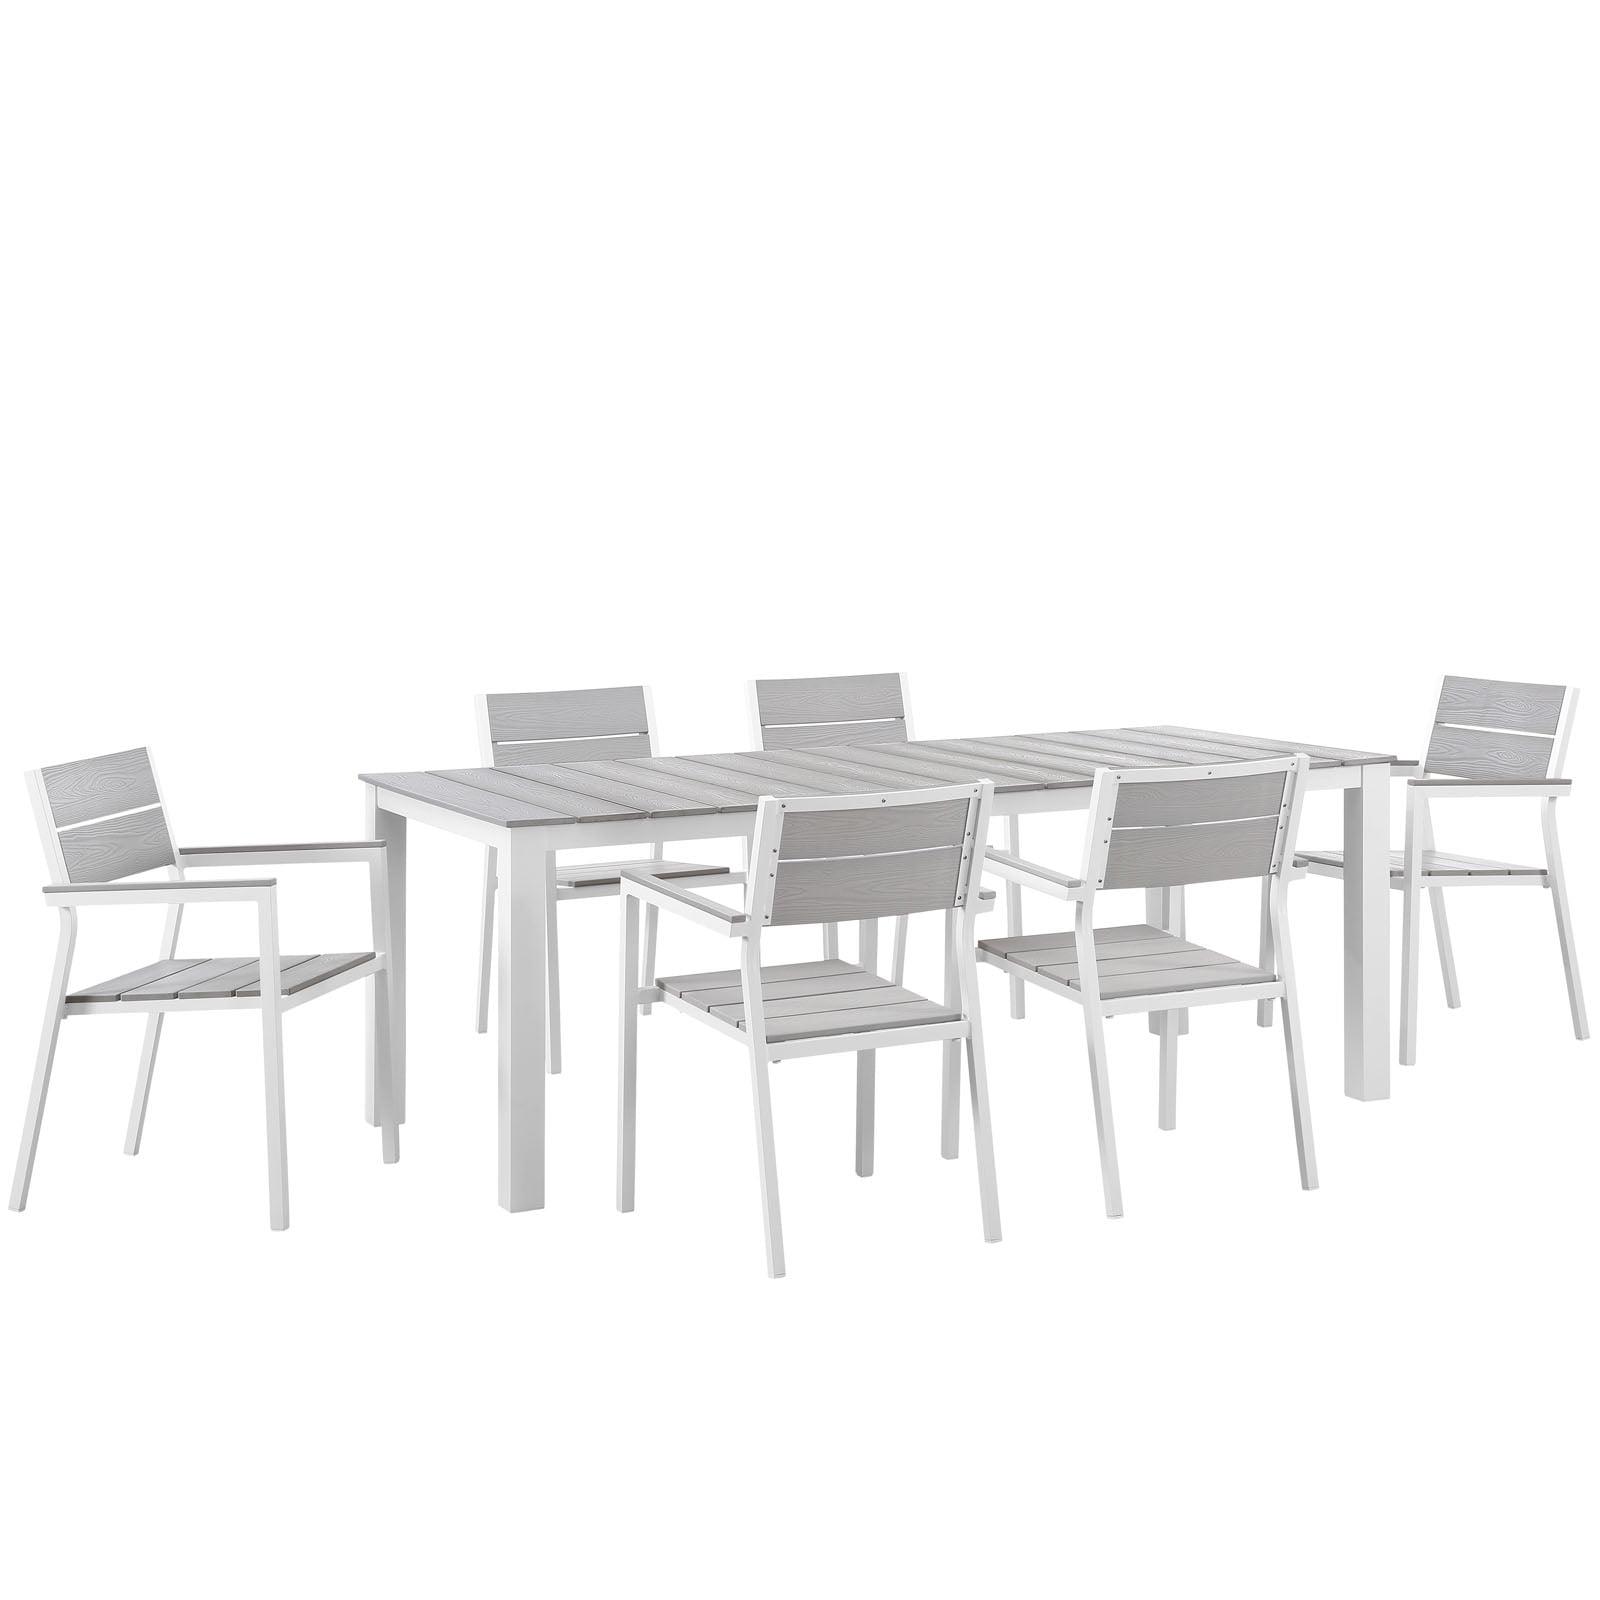 Maine 7-Piece White and Light Gray Aluminum Outdoor Dining Set